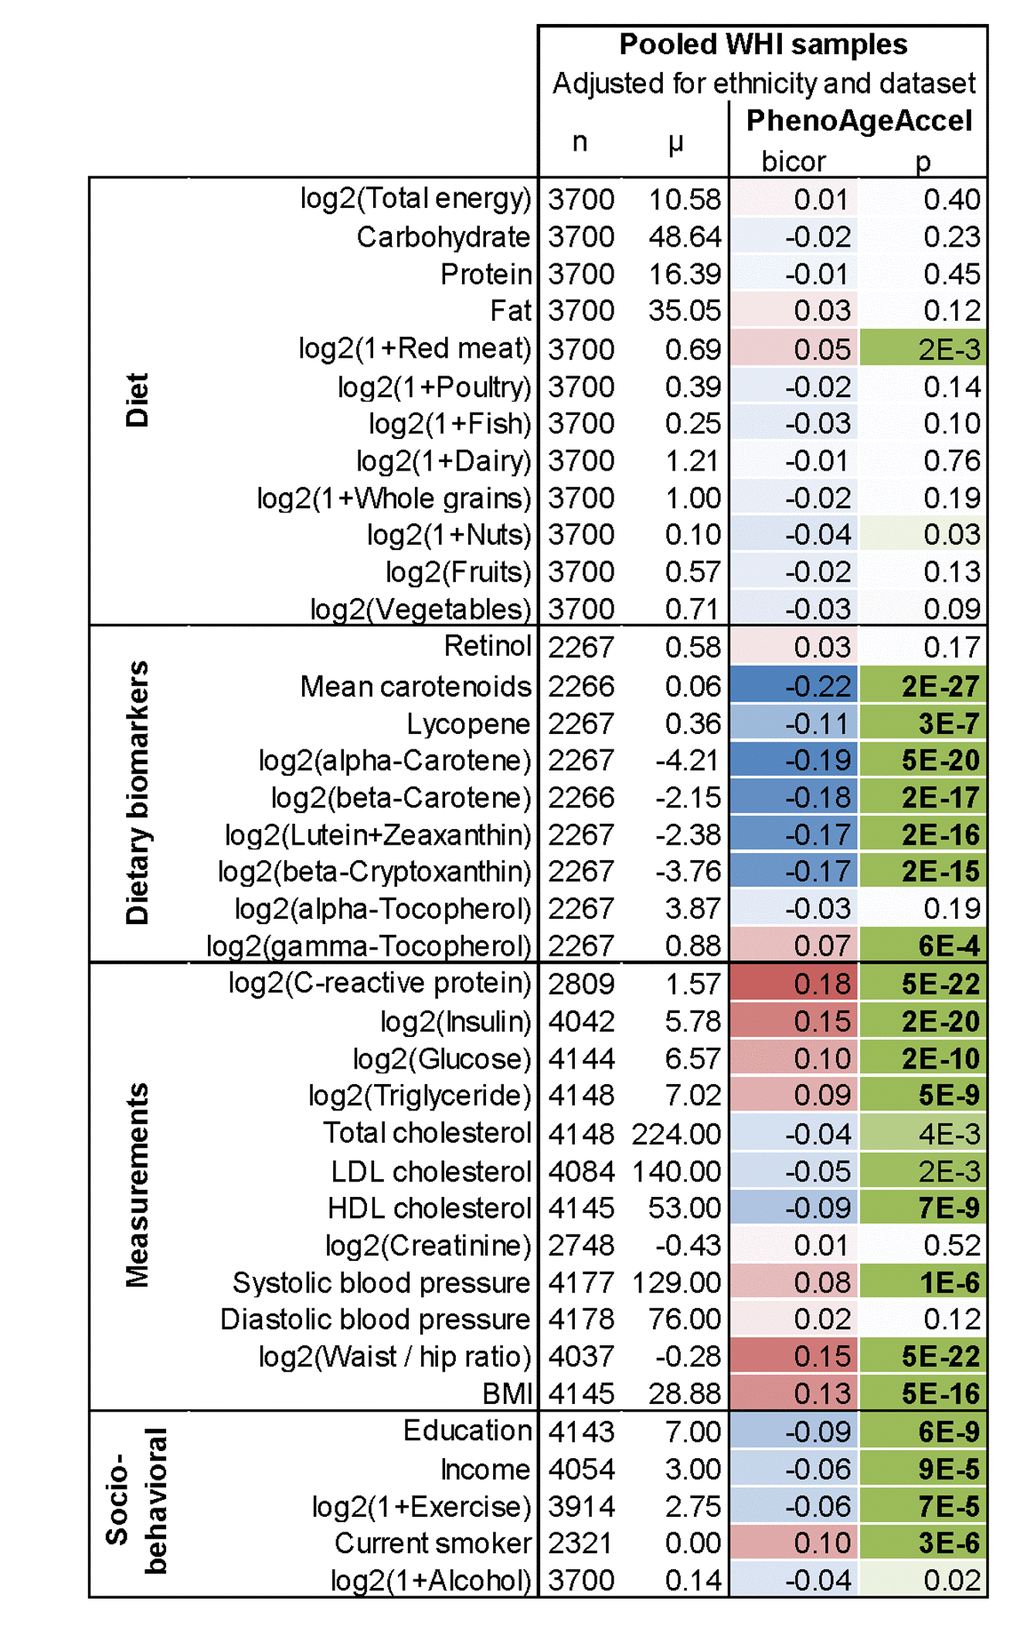 Lifestyle factors versus DNAm PhenoAge acceleration in blood in the WHI. In this cross- sectional analysis, the correlation test analysis (bicor, biweight midcorrelation) between select variables and DNAm PhenoAgeAccel reveals that education, income, exercise, proxies of fruit/vegetable consumption, and HDL cholesterol are negatively associated (blue) with DNAm PhenoAge, i.e. younger epigenetic age. Conversely, CRP, insulin, glucose, triglycerides, BMI, waist-to-hip ratio, systolic blood pressure, and smoking have a positive association (red) with DNAm PhenoAge. All results have been adjusted for ethnicity and batch/data set. Similar results based on multivariate regression models can be found in Supplement 1: Fig. S6B.